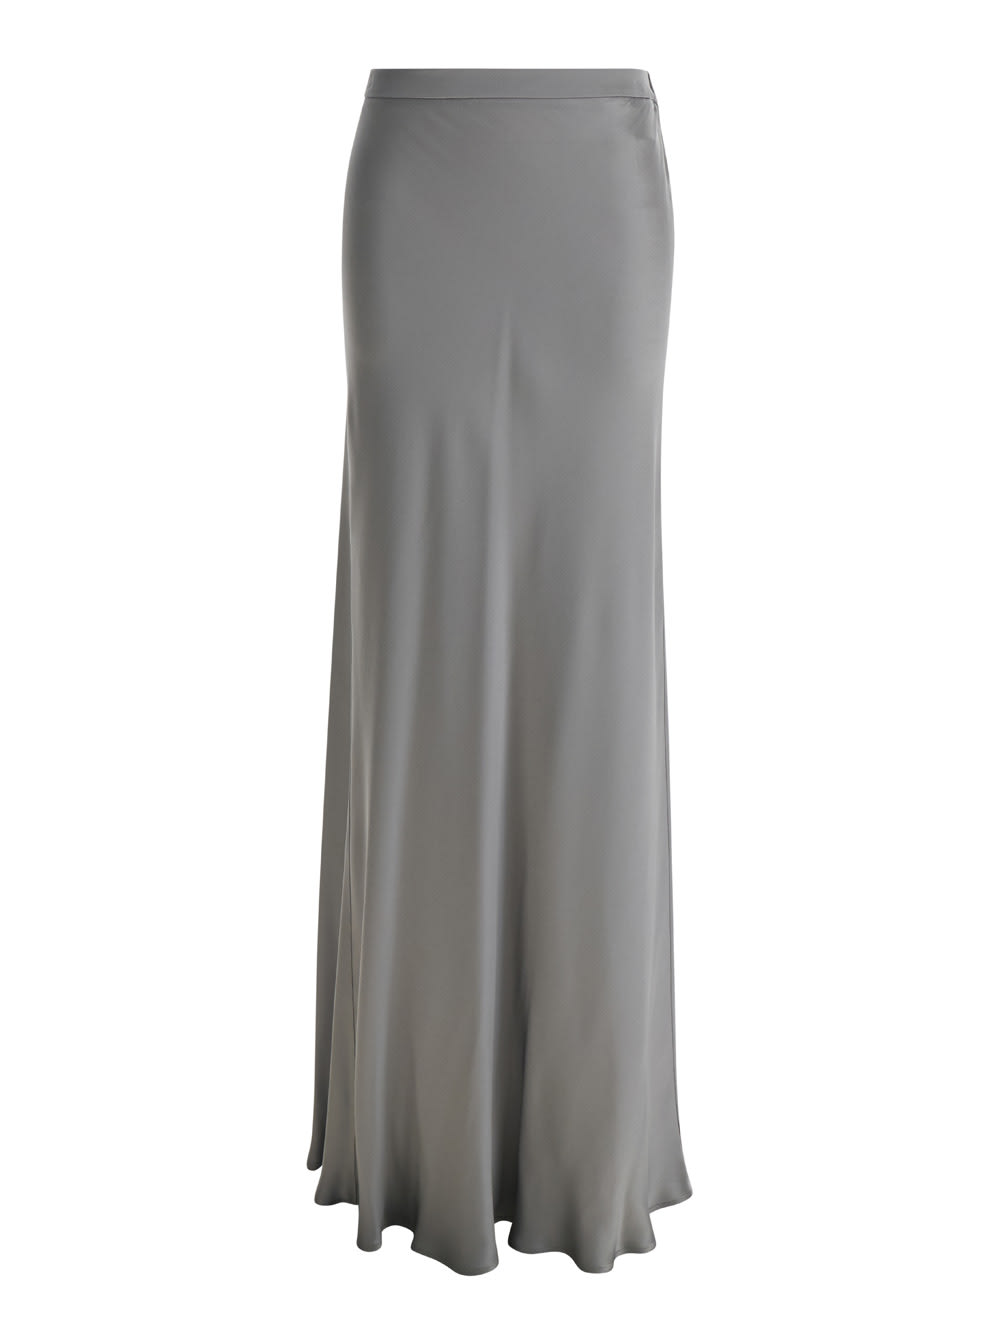 Maxi Grey Skirt With Split At The Back In Acetate Blend Woman